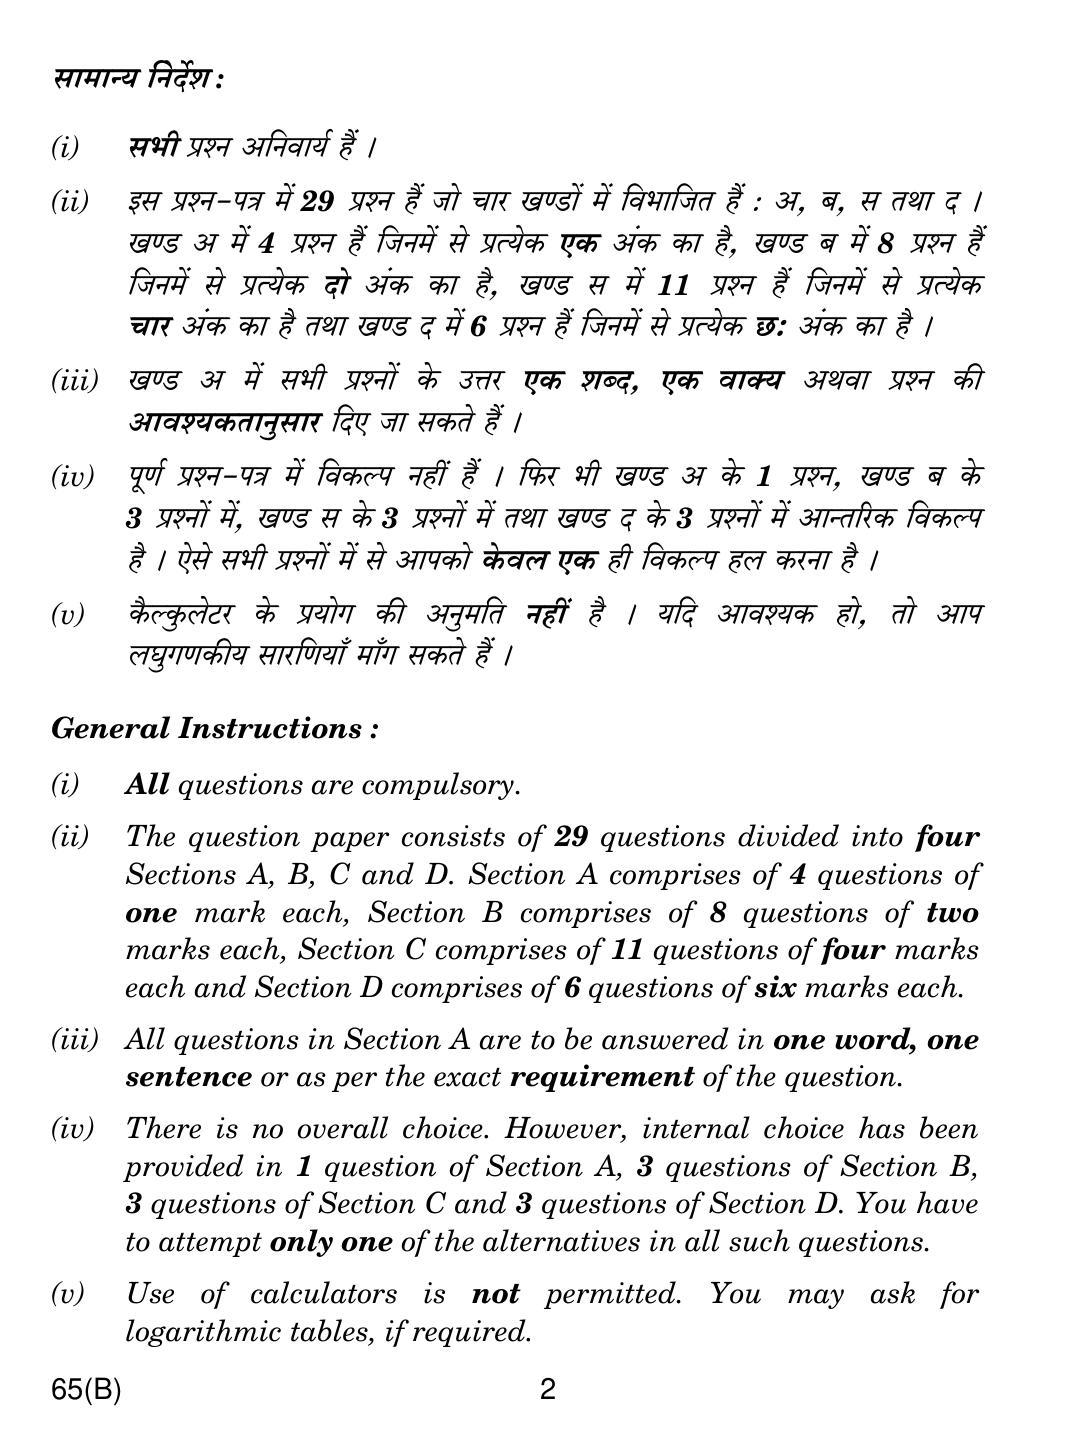 CBSE Class 12 65(B) MATHS For Blind Candidates 2019 Compartment Question Paper - Page 2